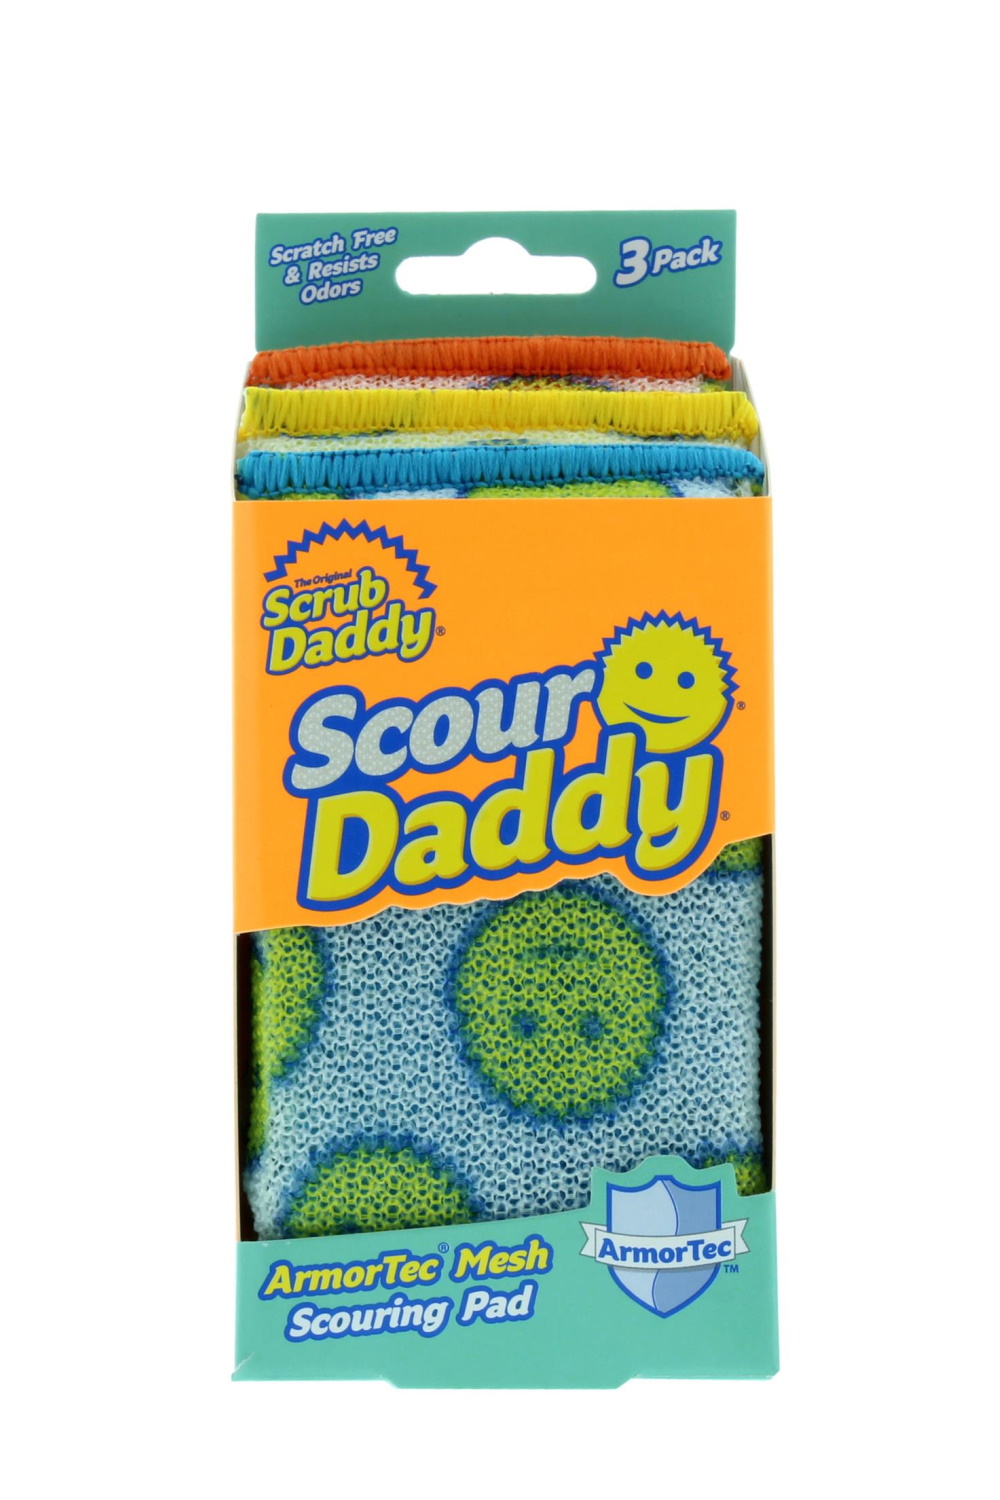 Scrub Daddy Scouring Pad 3-Pack – fullyscrubbed.com